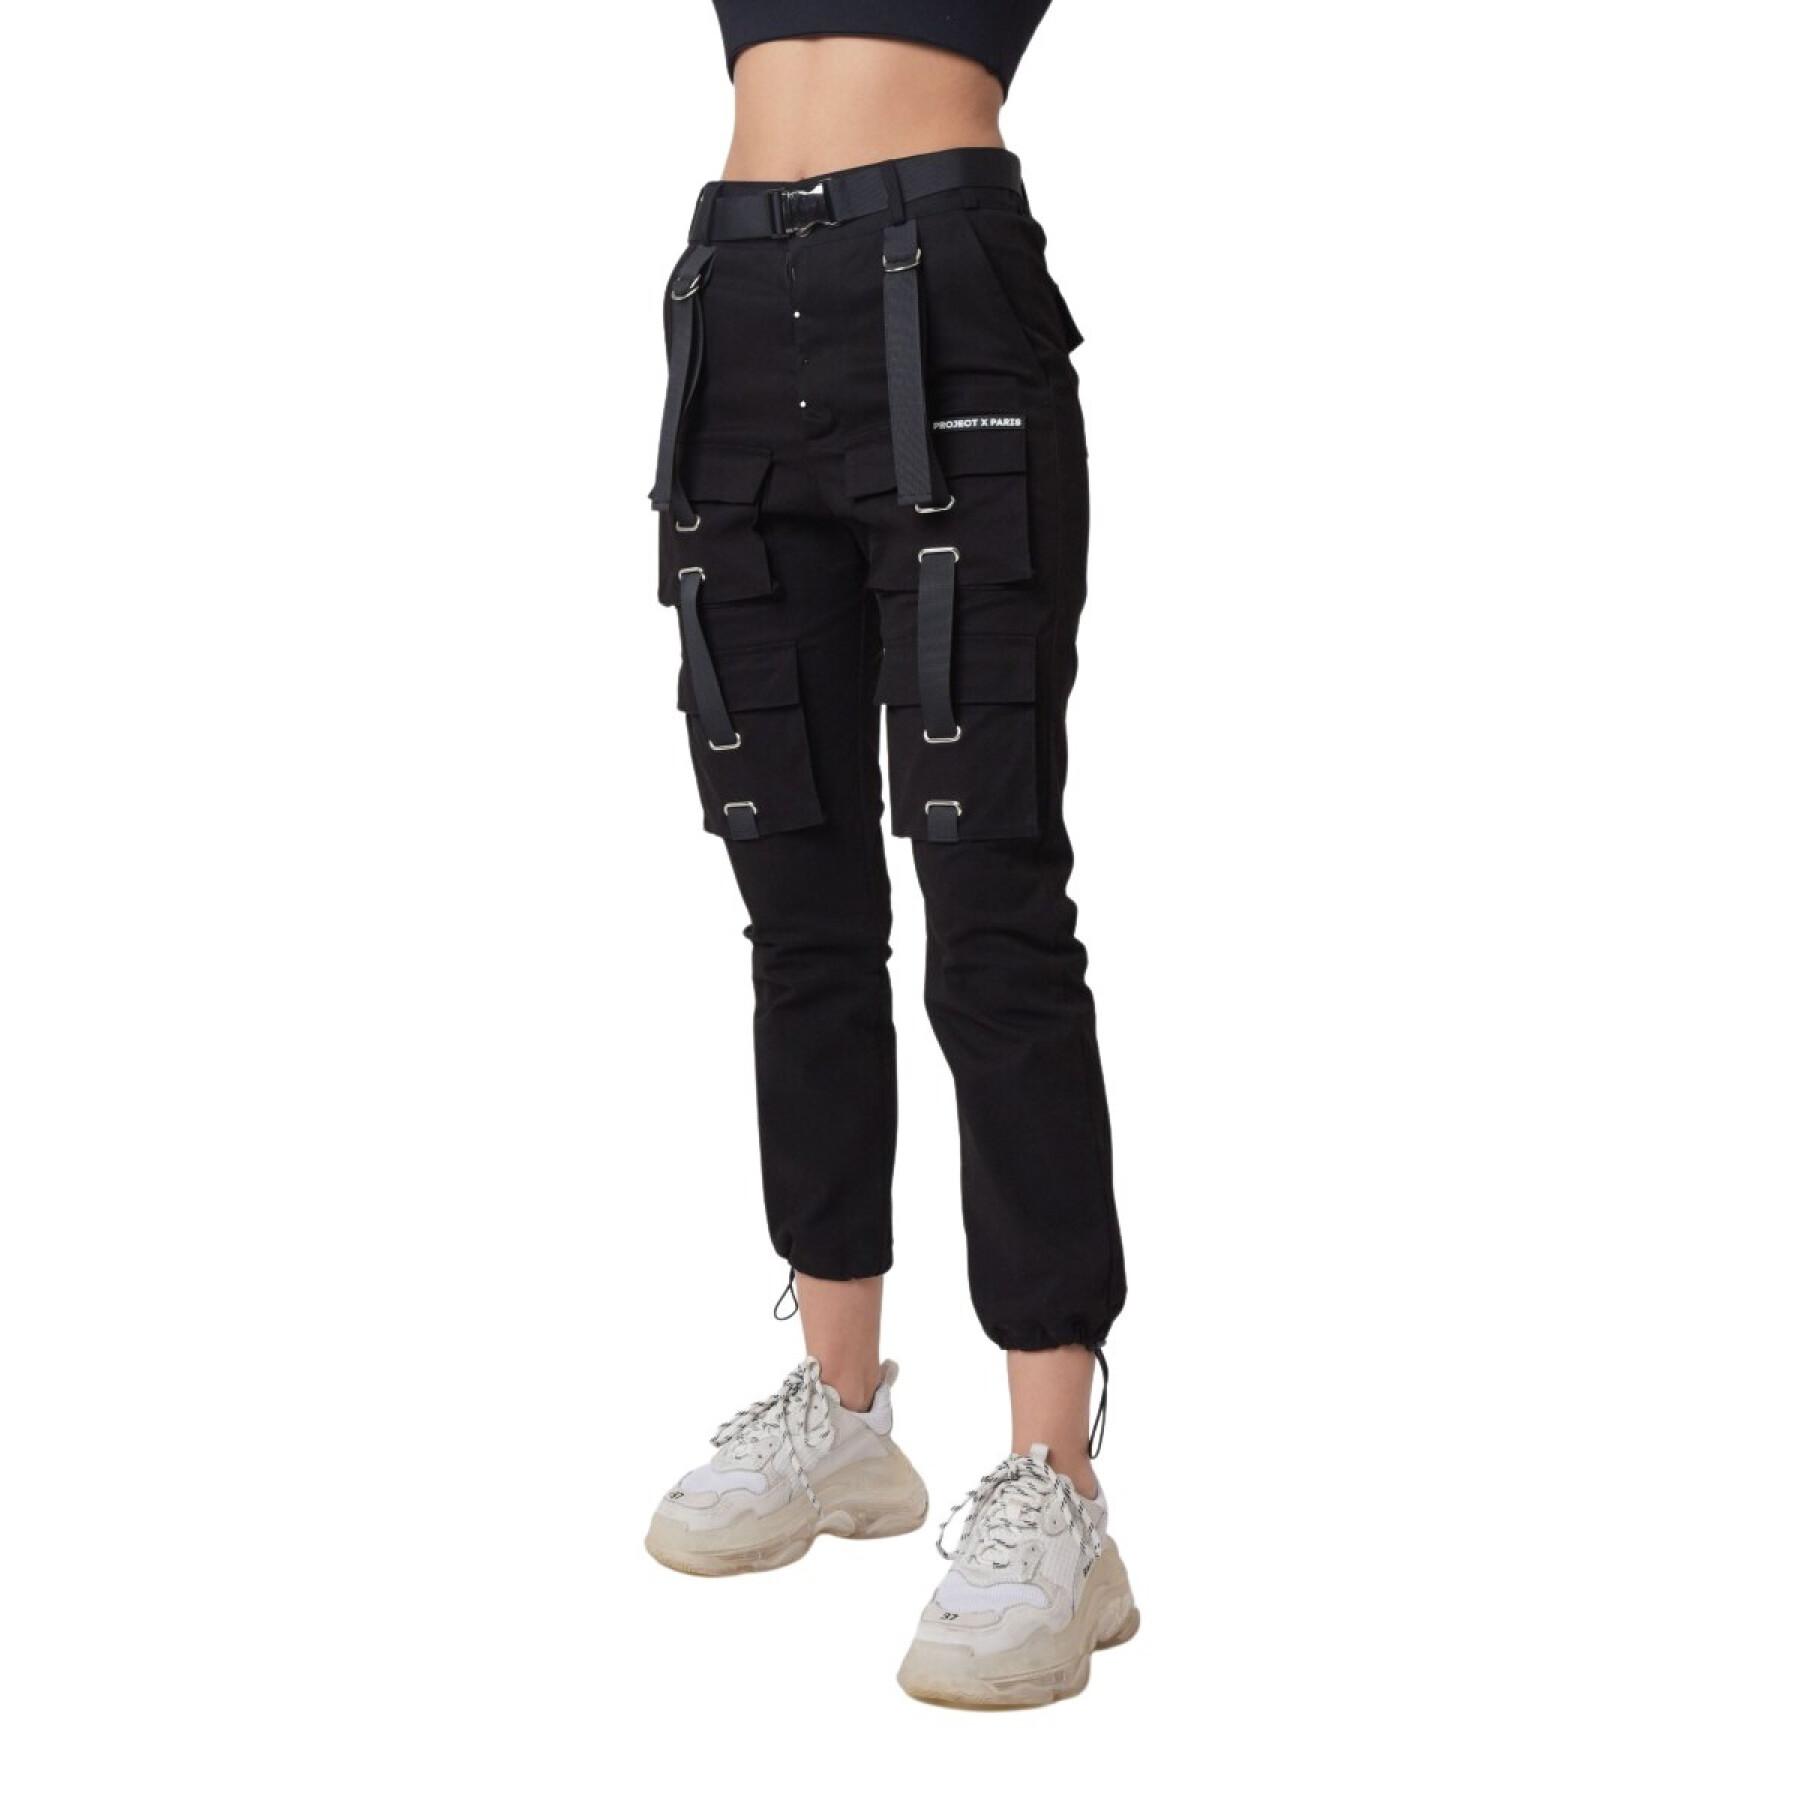 Jogging suit with pockets and strap detail for women Project X Paris